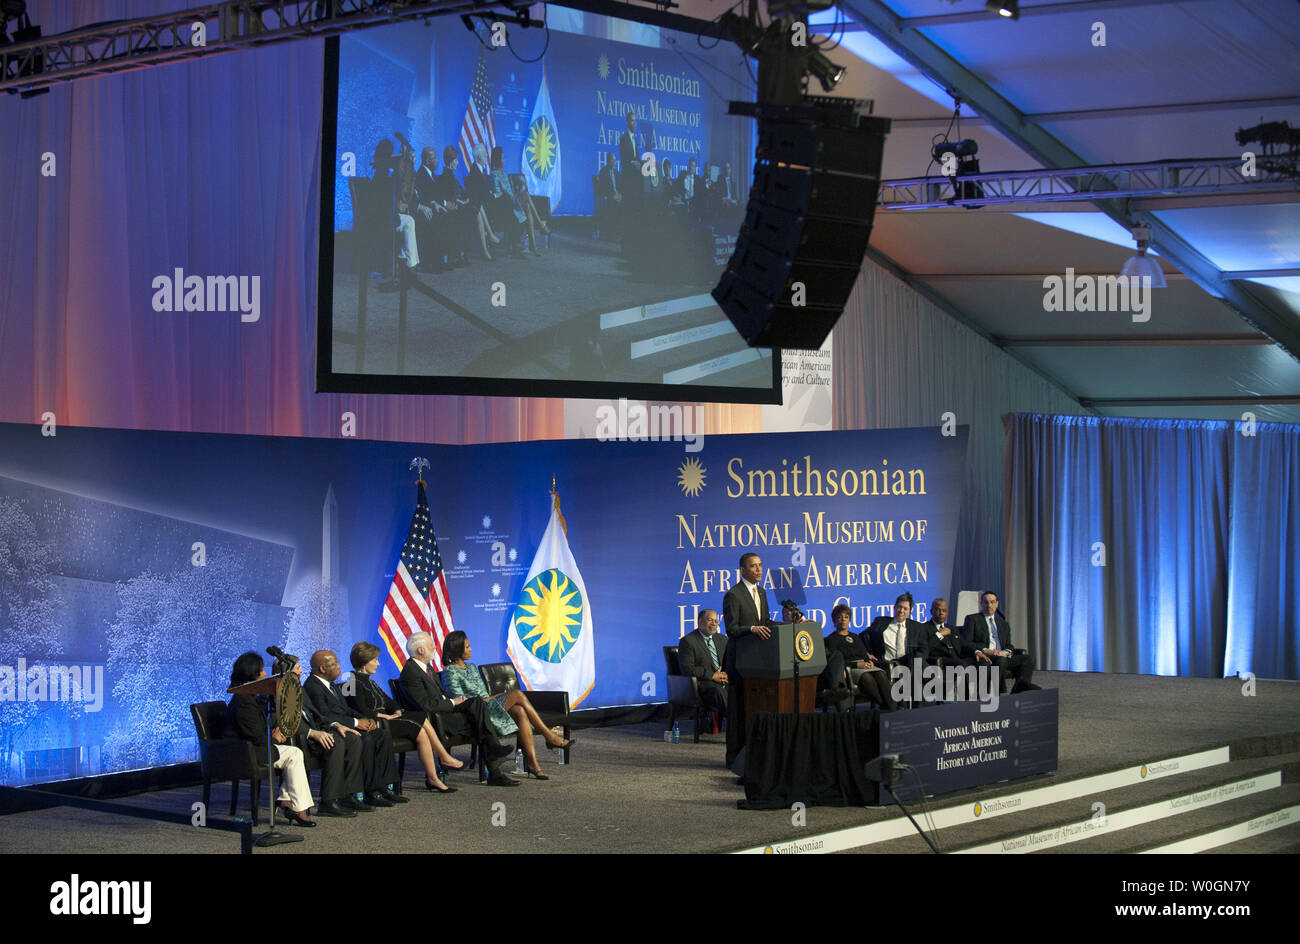 President Barack Obama speaks at the ground breaking ceremony for the Smithsonian National Museum of African American History and Culture in Washington, D.C. on February 22, 2012. Obama was joined by Smithsonian, religious and political leaders. The museum is set to open in 2015. UPI/Kevin Dietsch Stock Photo